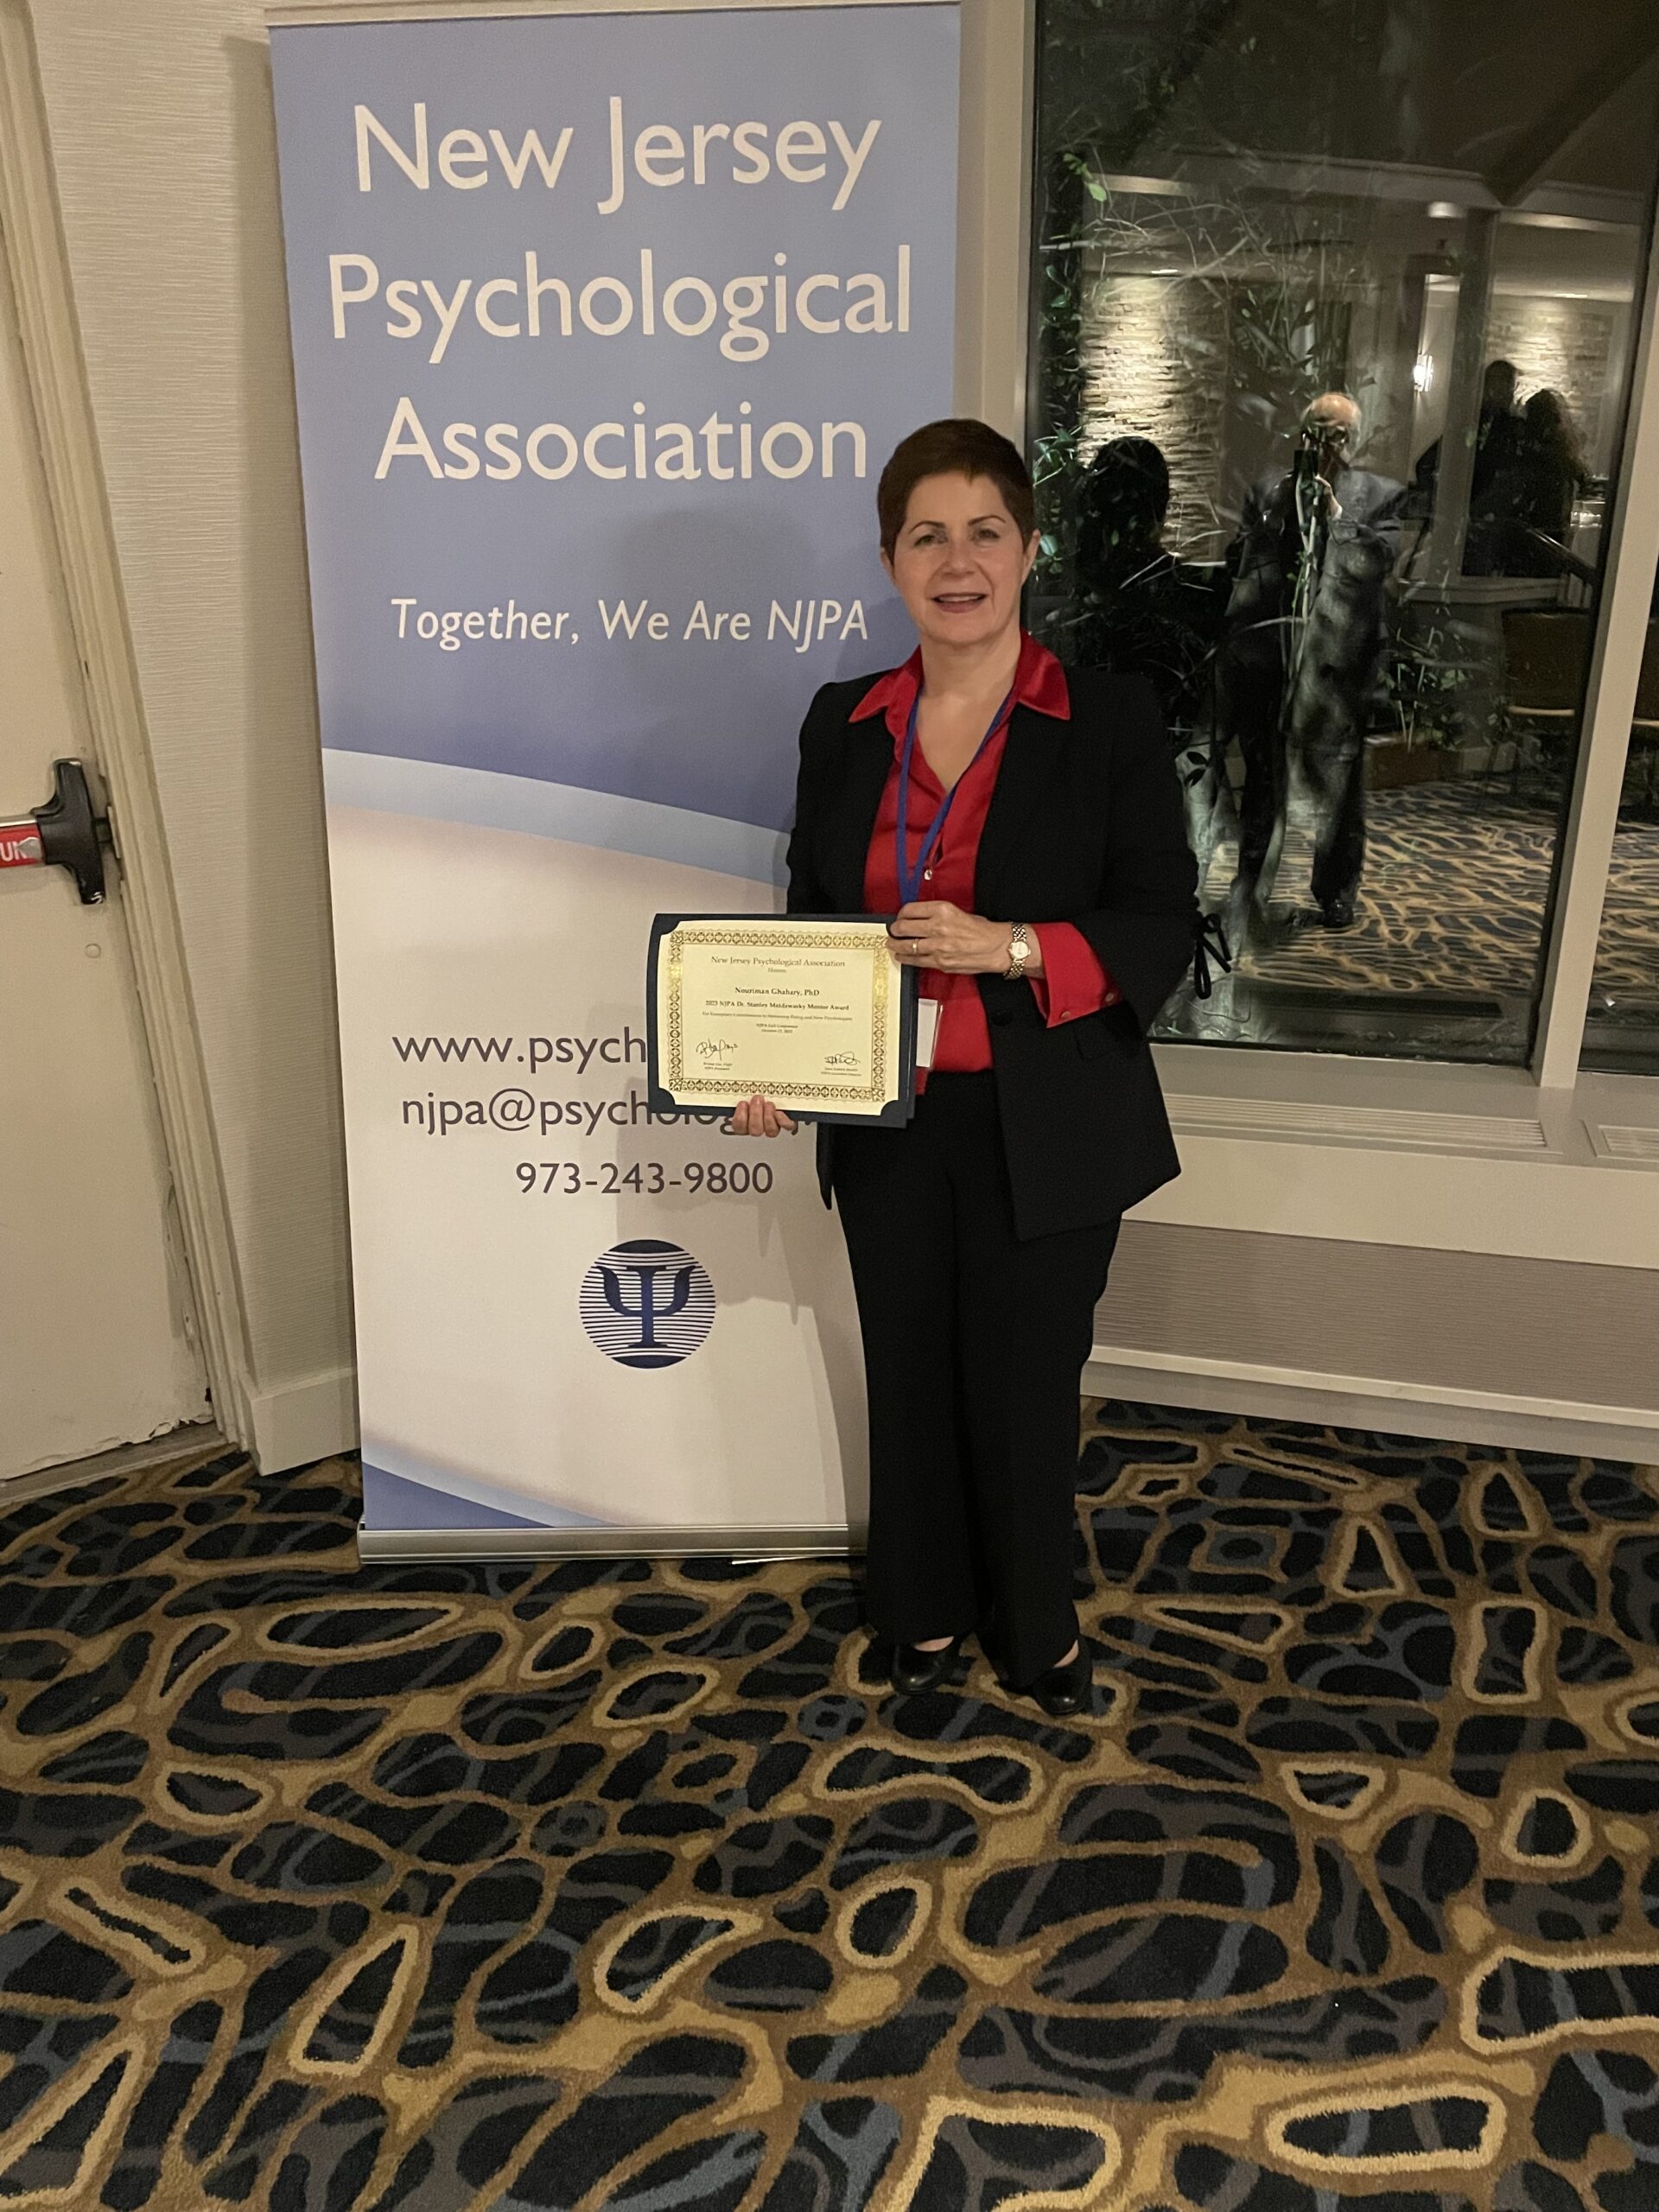 The NJPA Dr. Stanley Moldawsky Mentor Award for 2023 was presented to Dr. Nouriman Ghahary, director of clinical training and associate professor for the Counseling psychology doctoral program at Felician University.